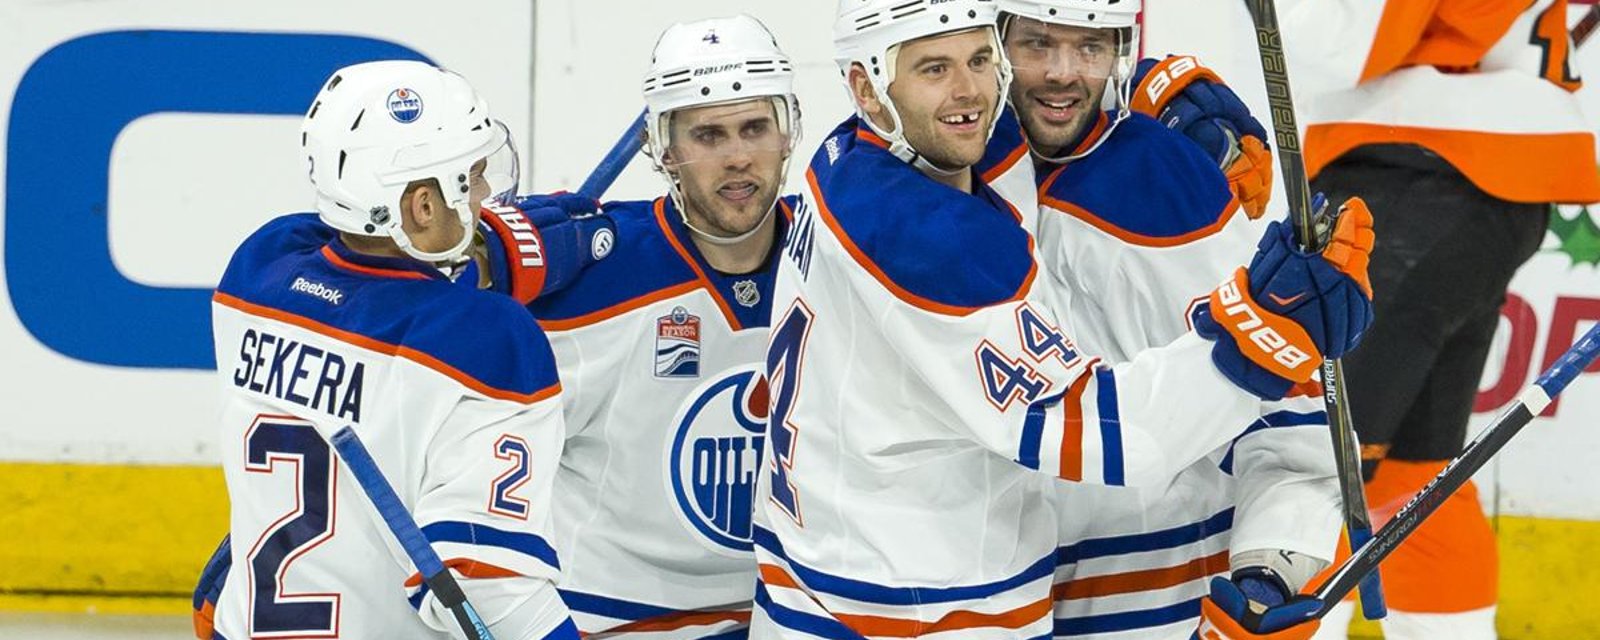 Struggling player to rejoin the Oilers lineup tonight.